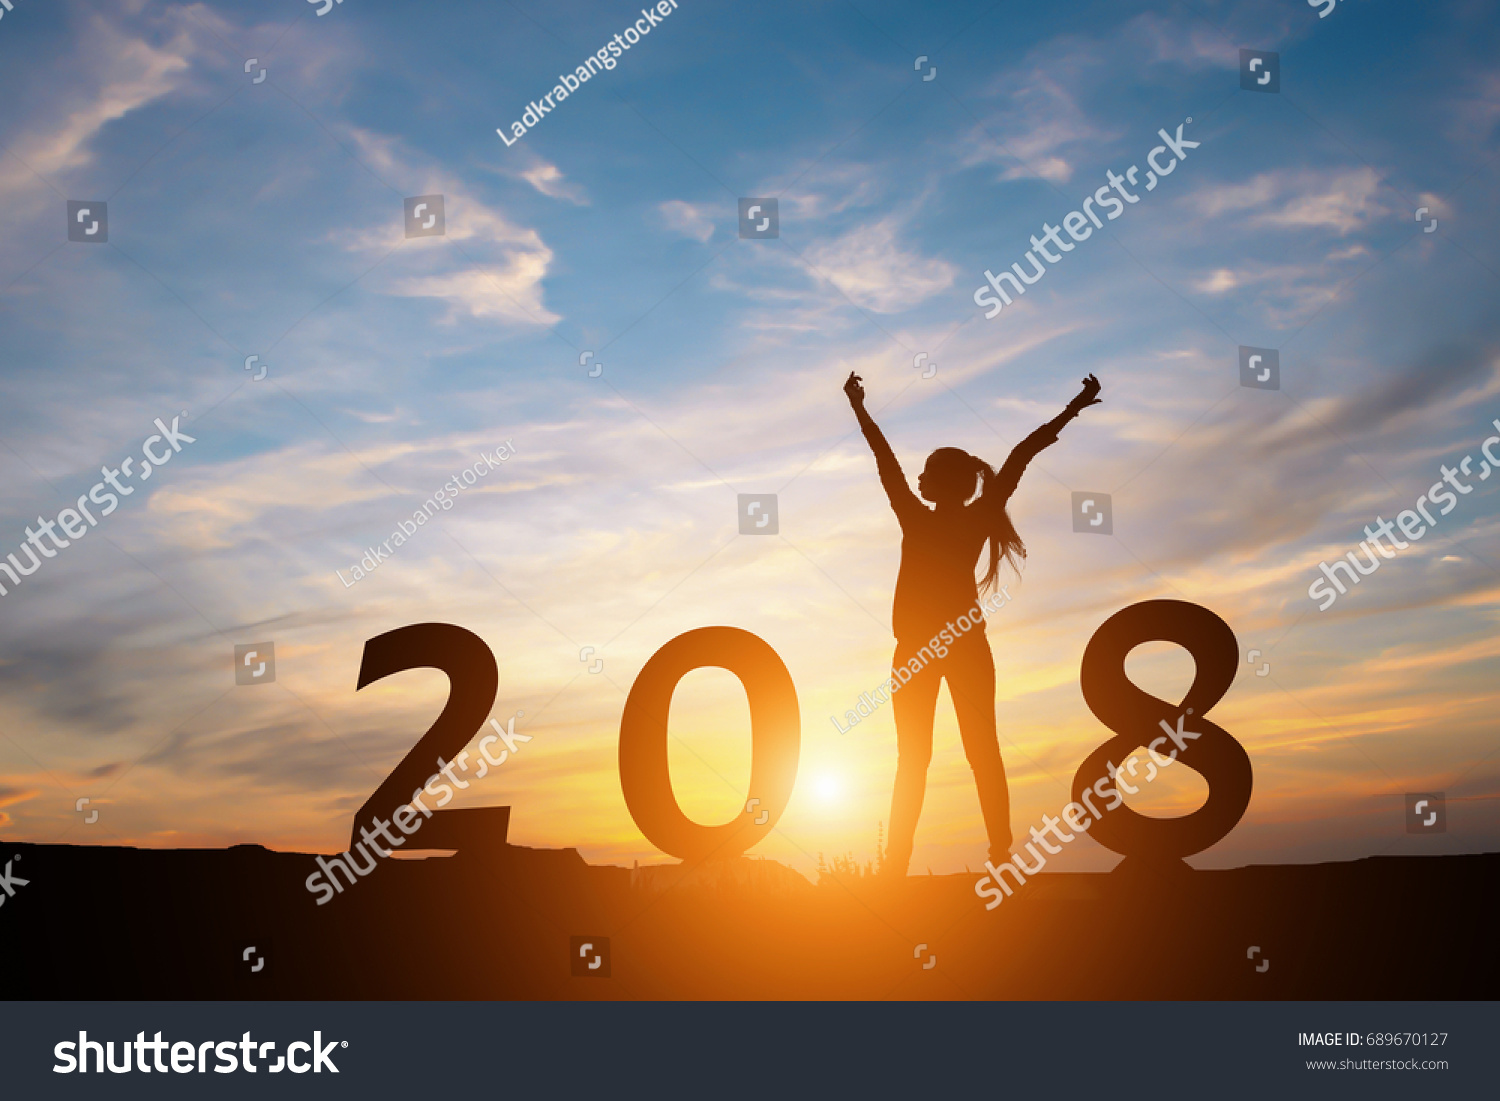 Silhouette of happy woman with New year 2018 concept in sunset background. #689670127